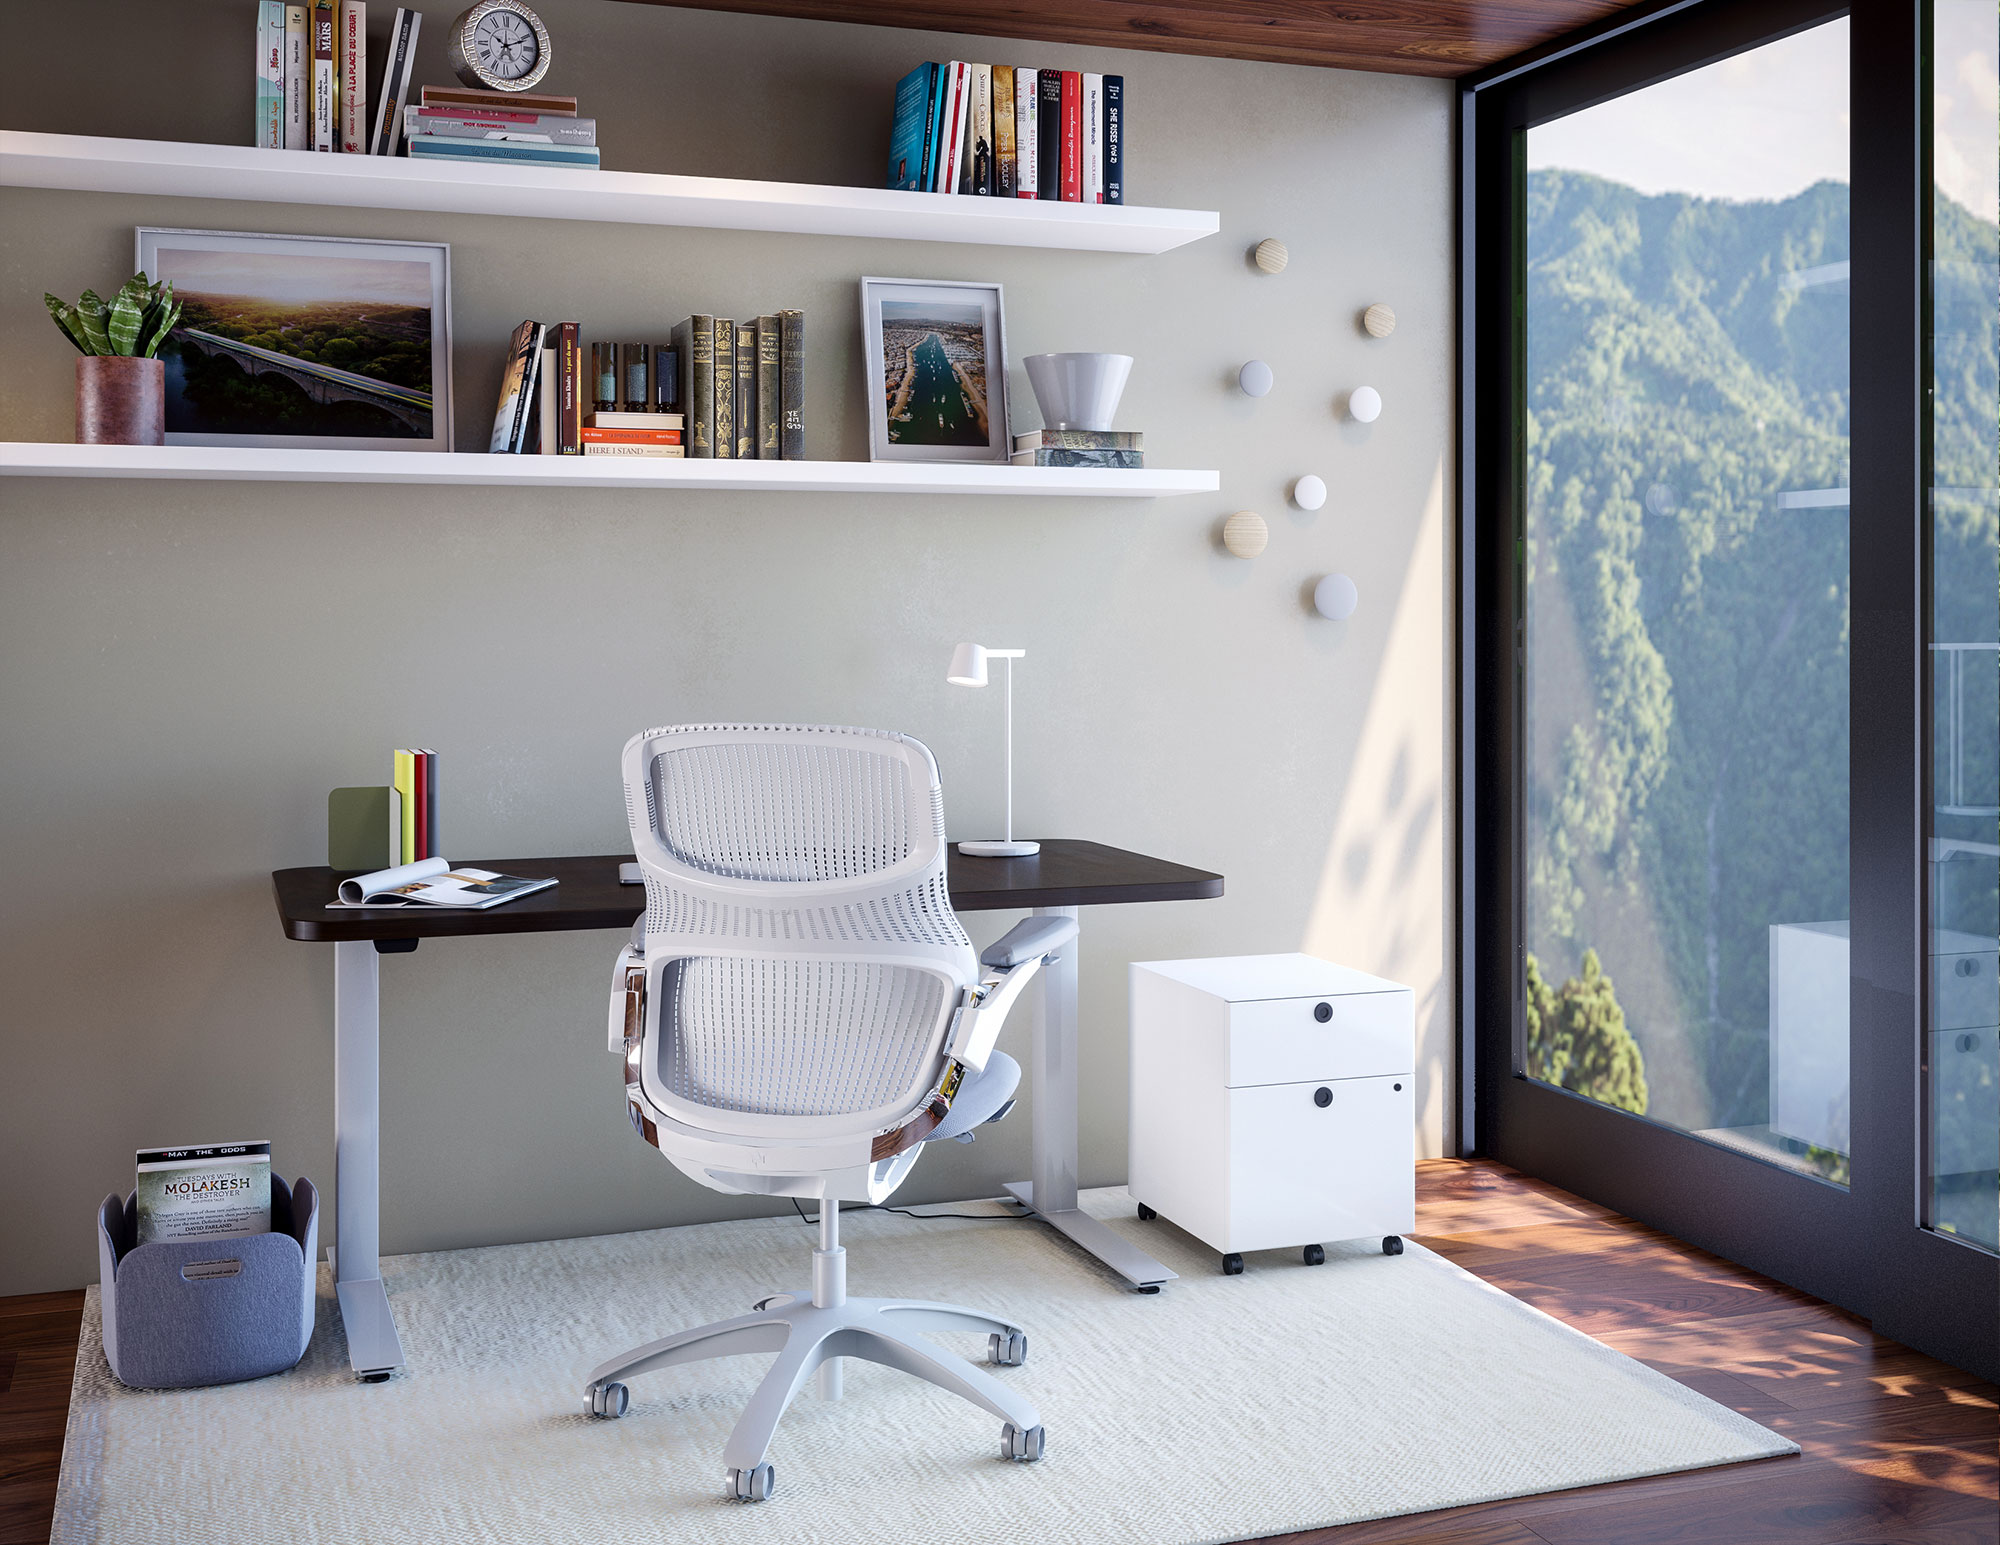 Working from home with the latest in home office design